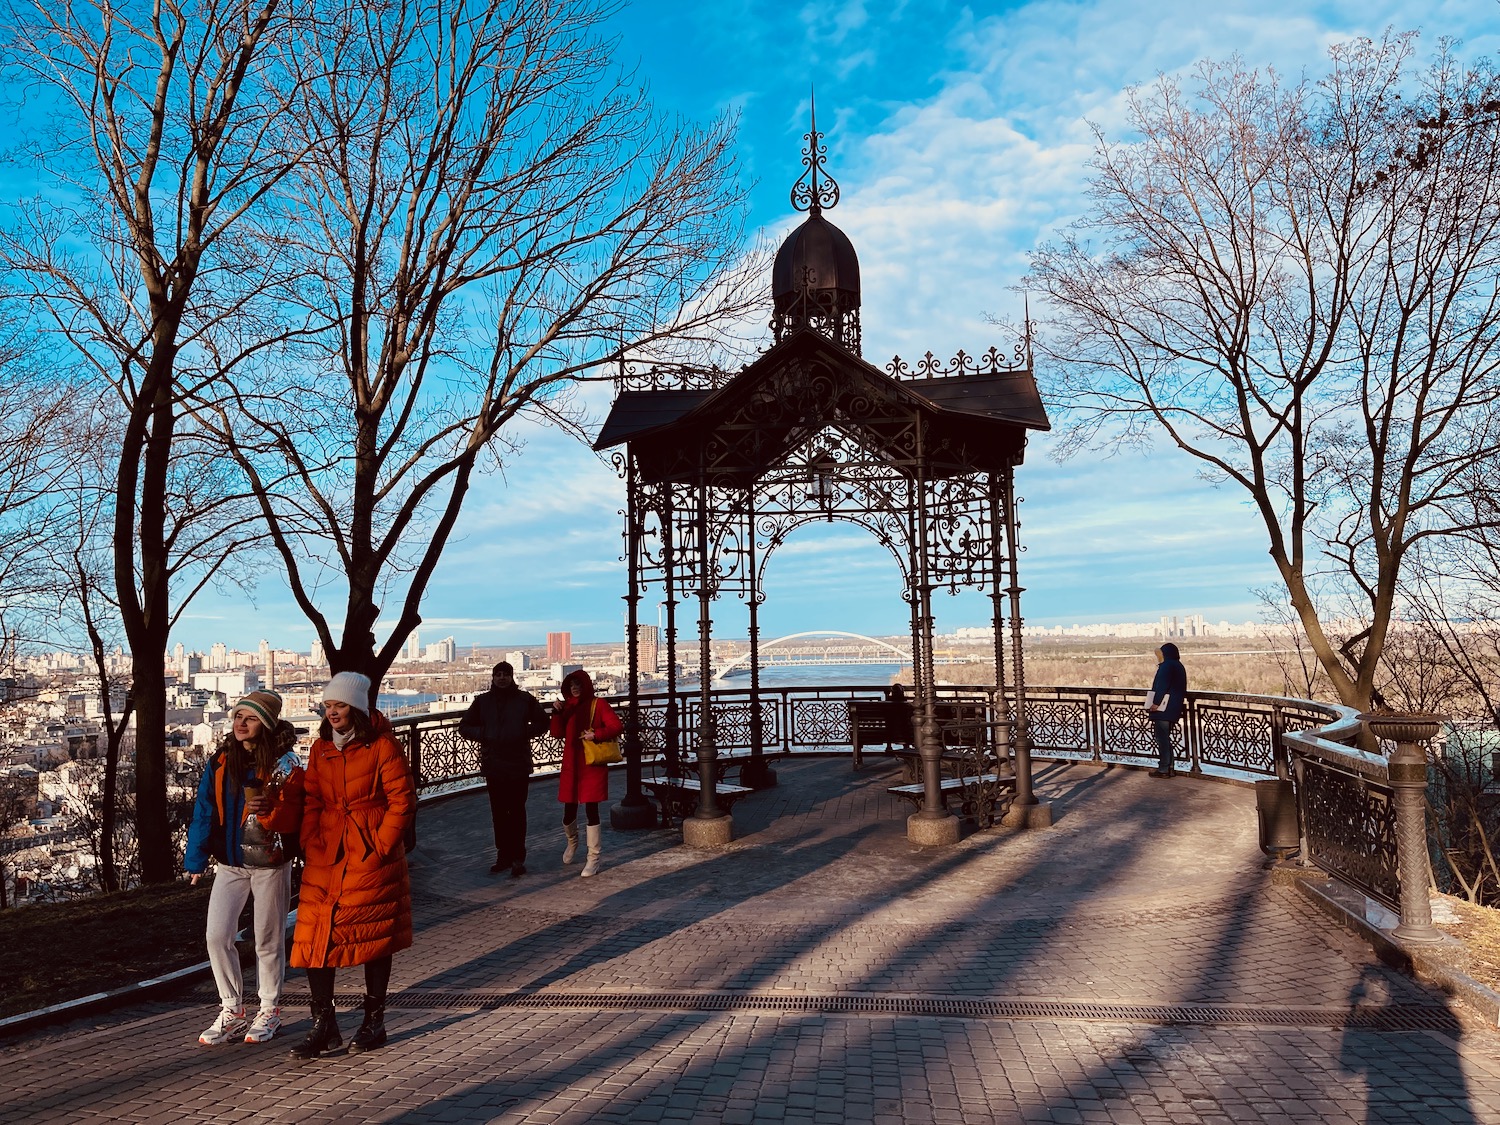 people standing on a walkway with a gazebo and people walking around